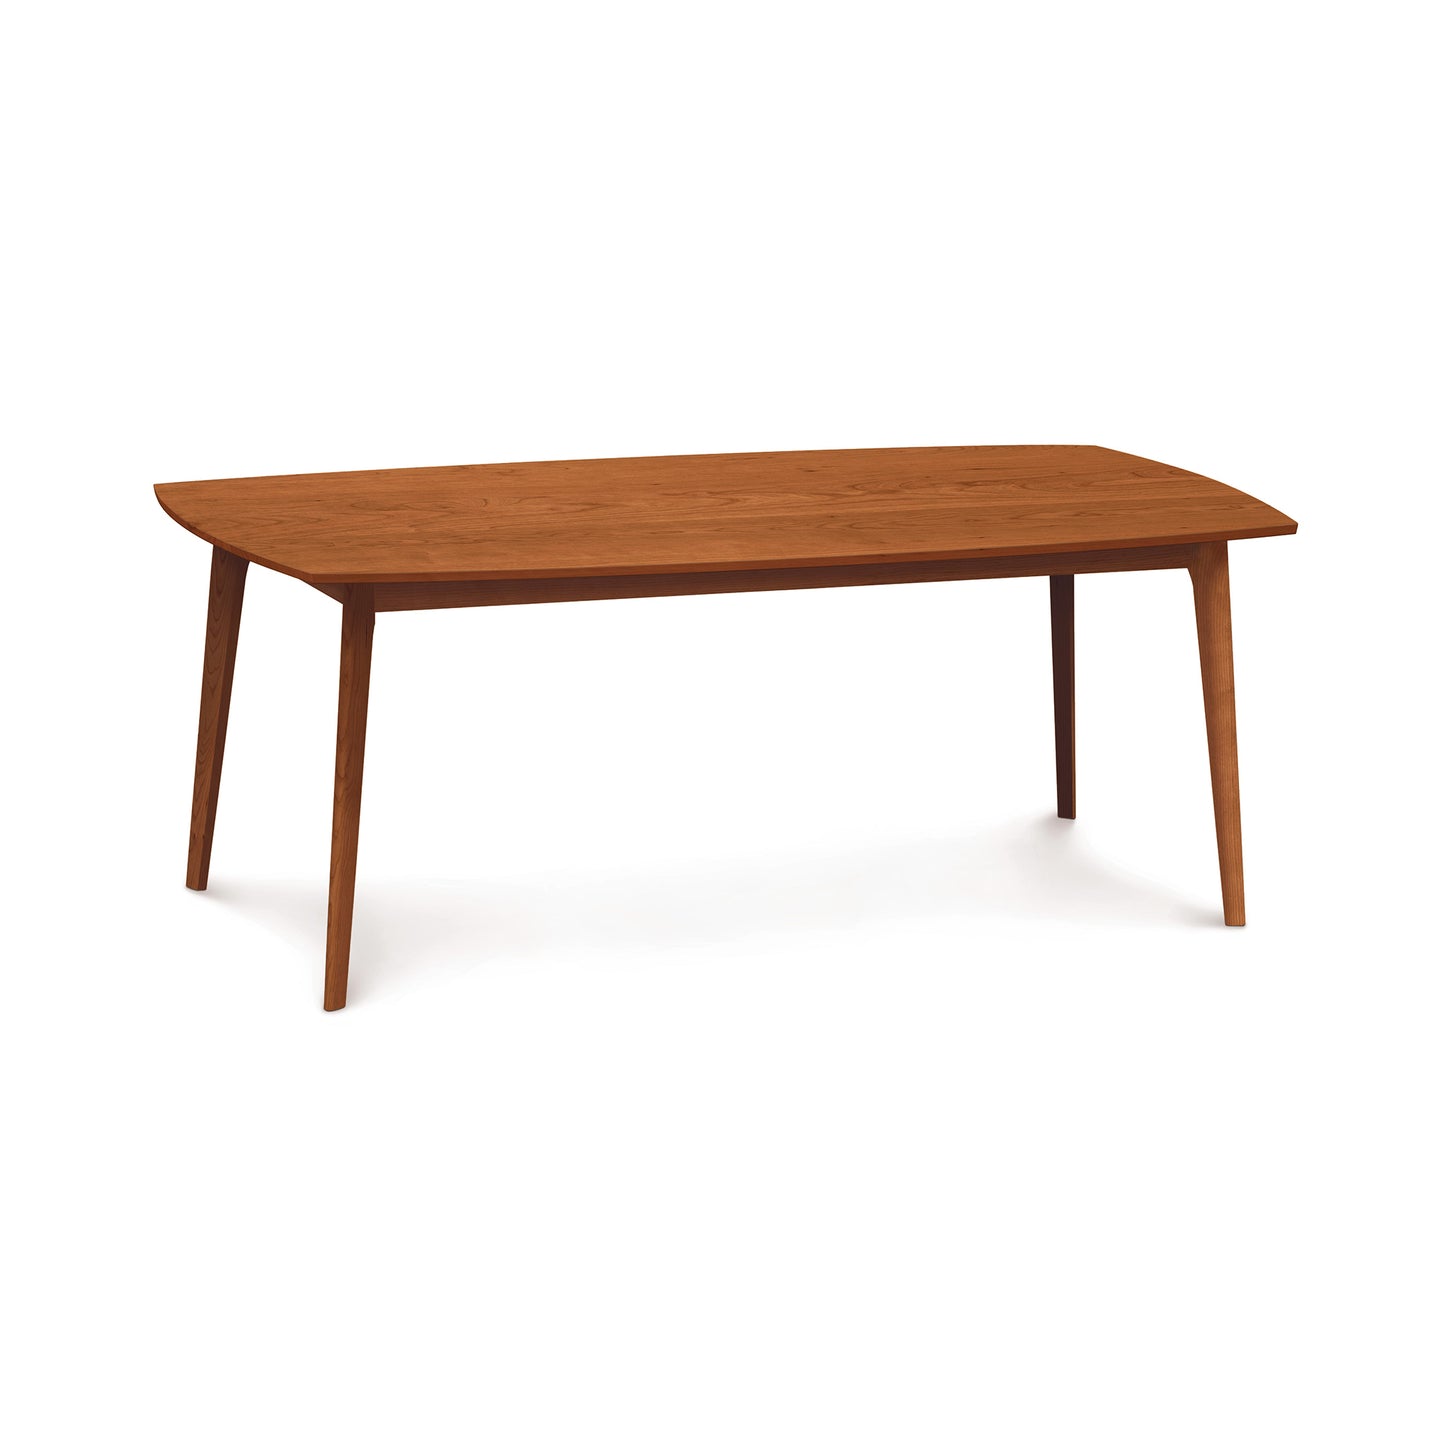 A Catalina Solid-Top Table by Copeland Furniture on a white background.